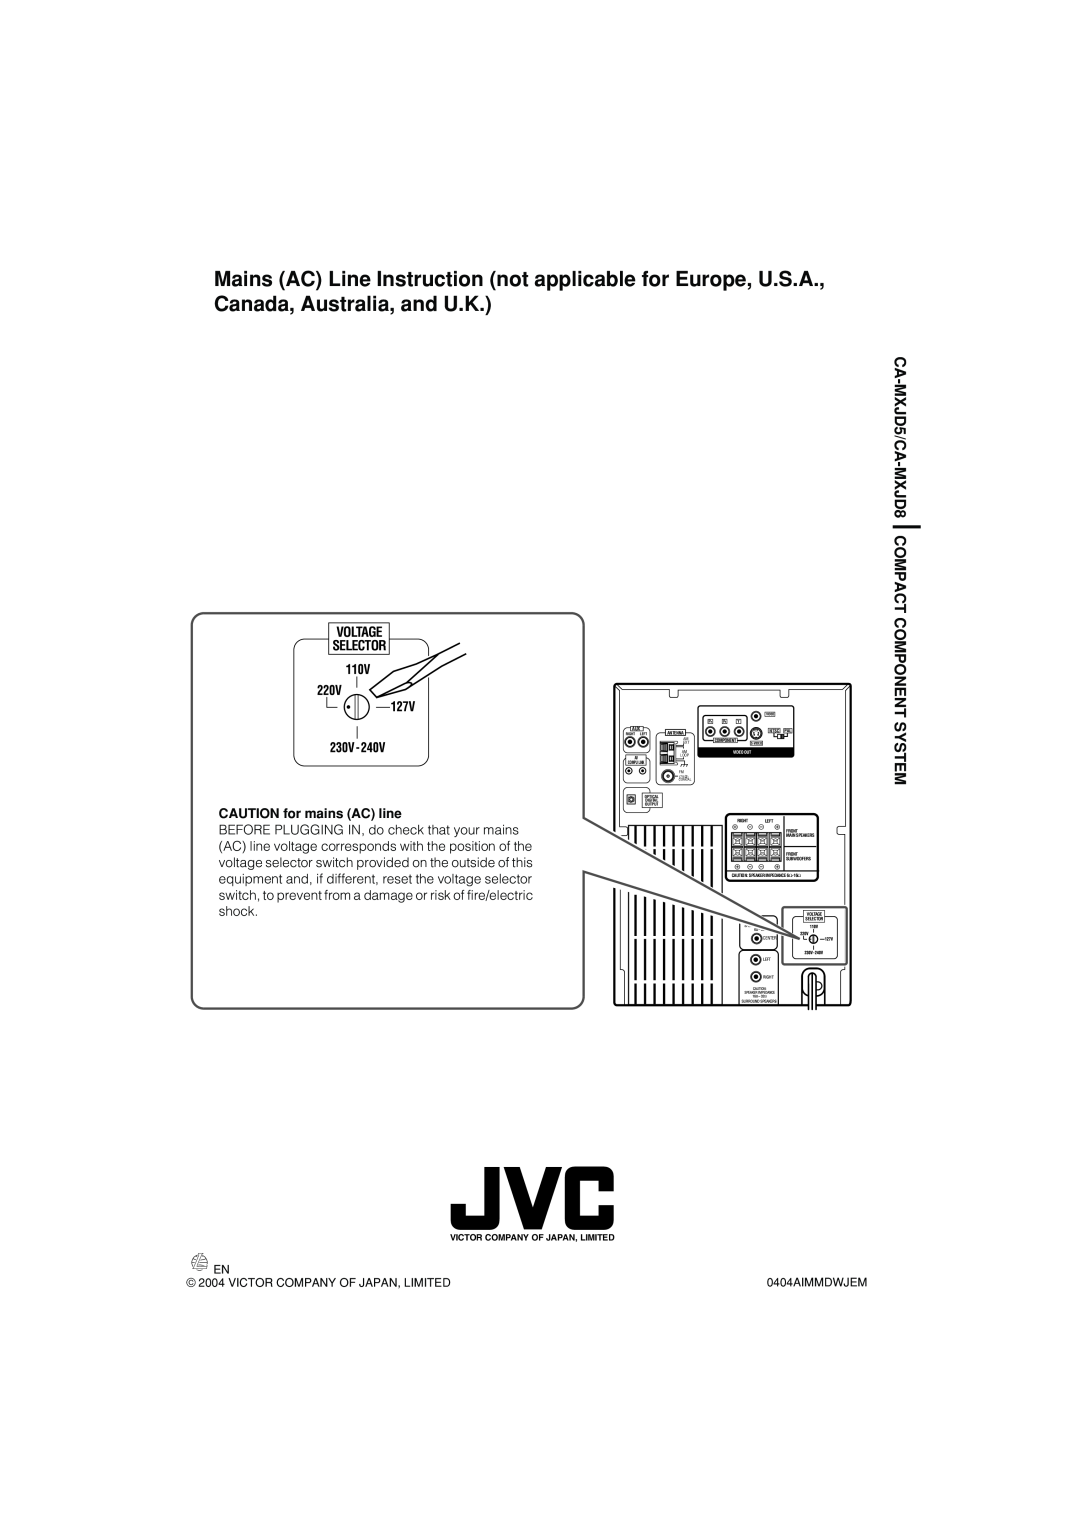 JVC CA-MXJD8UW manual CA-MXJD5/CA-MXJD8COMPACT COMPONENT SYSTEM, VOLTAGE SELECTOR CAUTION for mains AC line, 0404AIMMDWJEM 